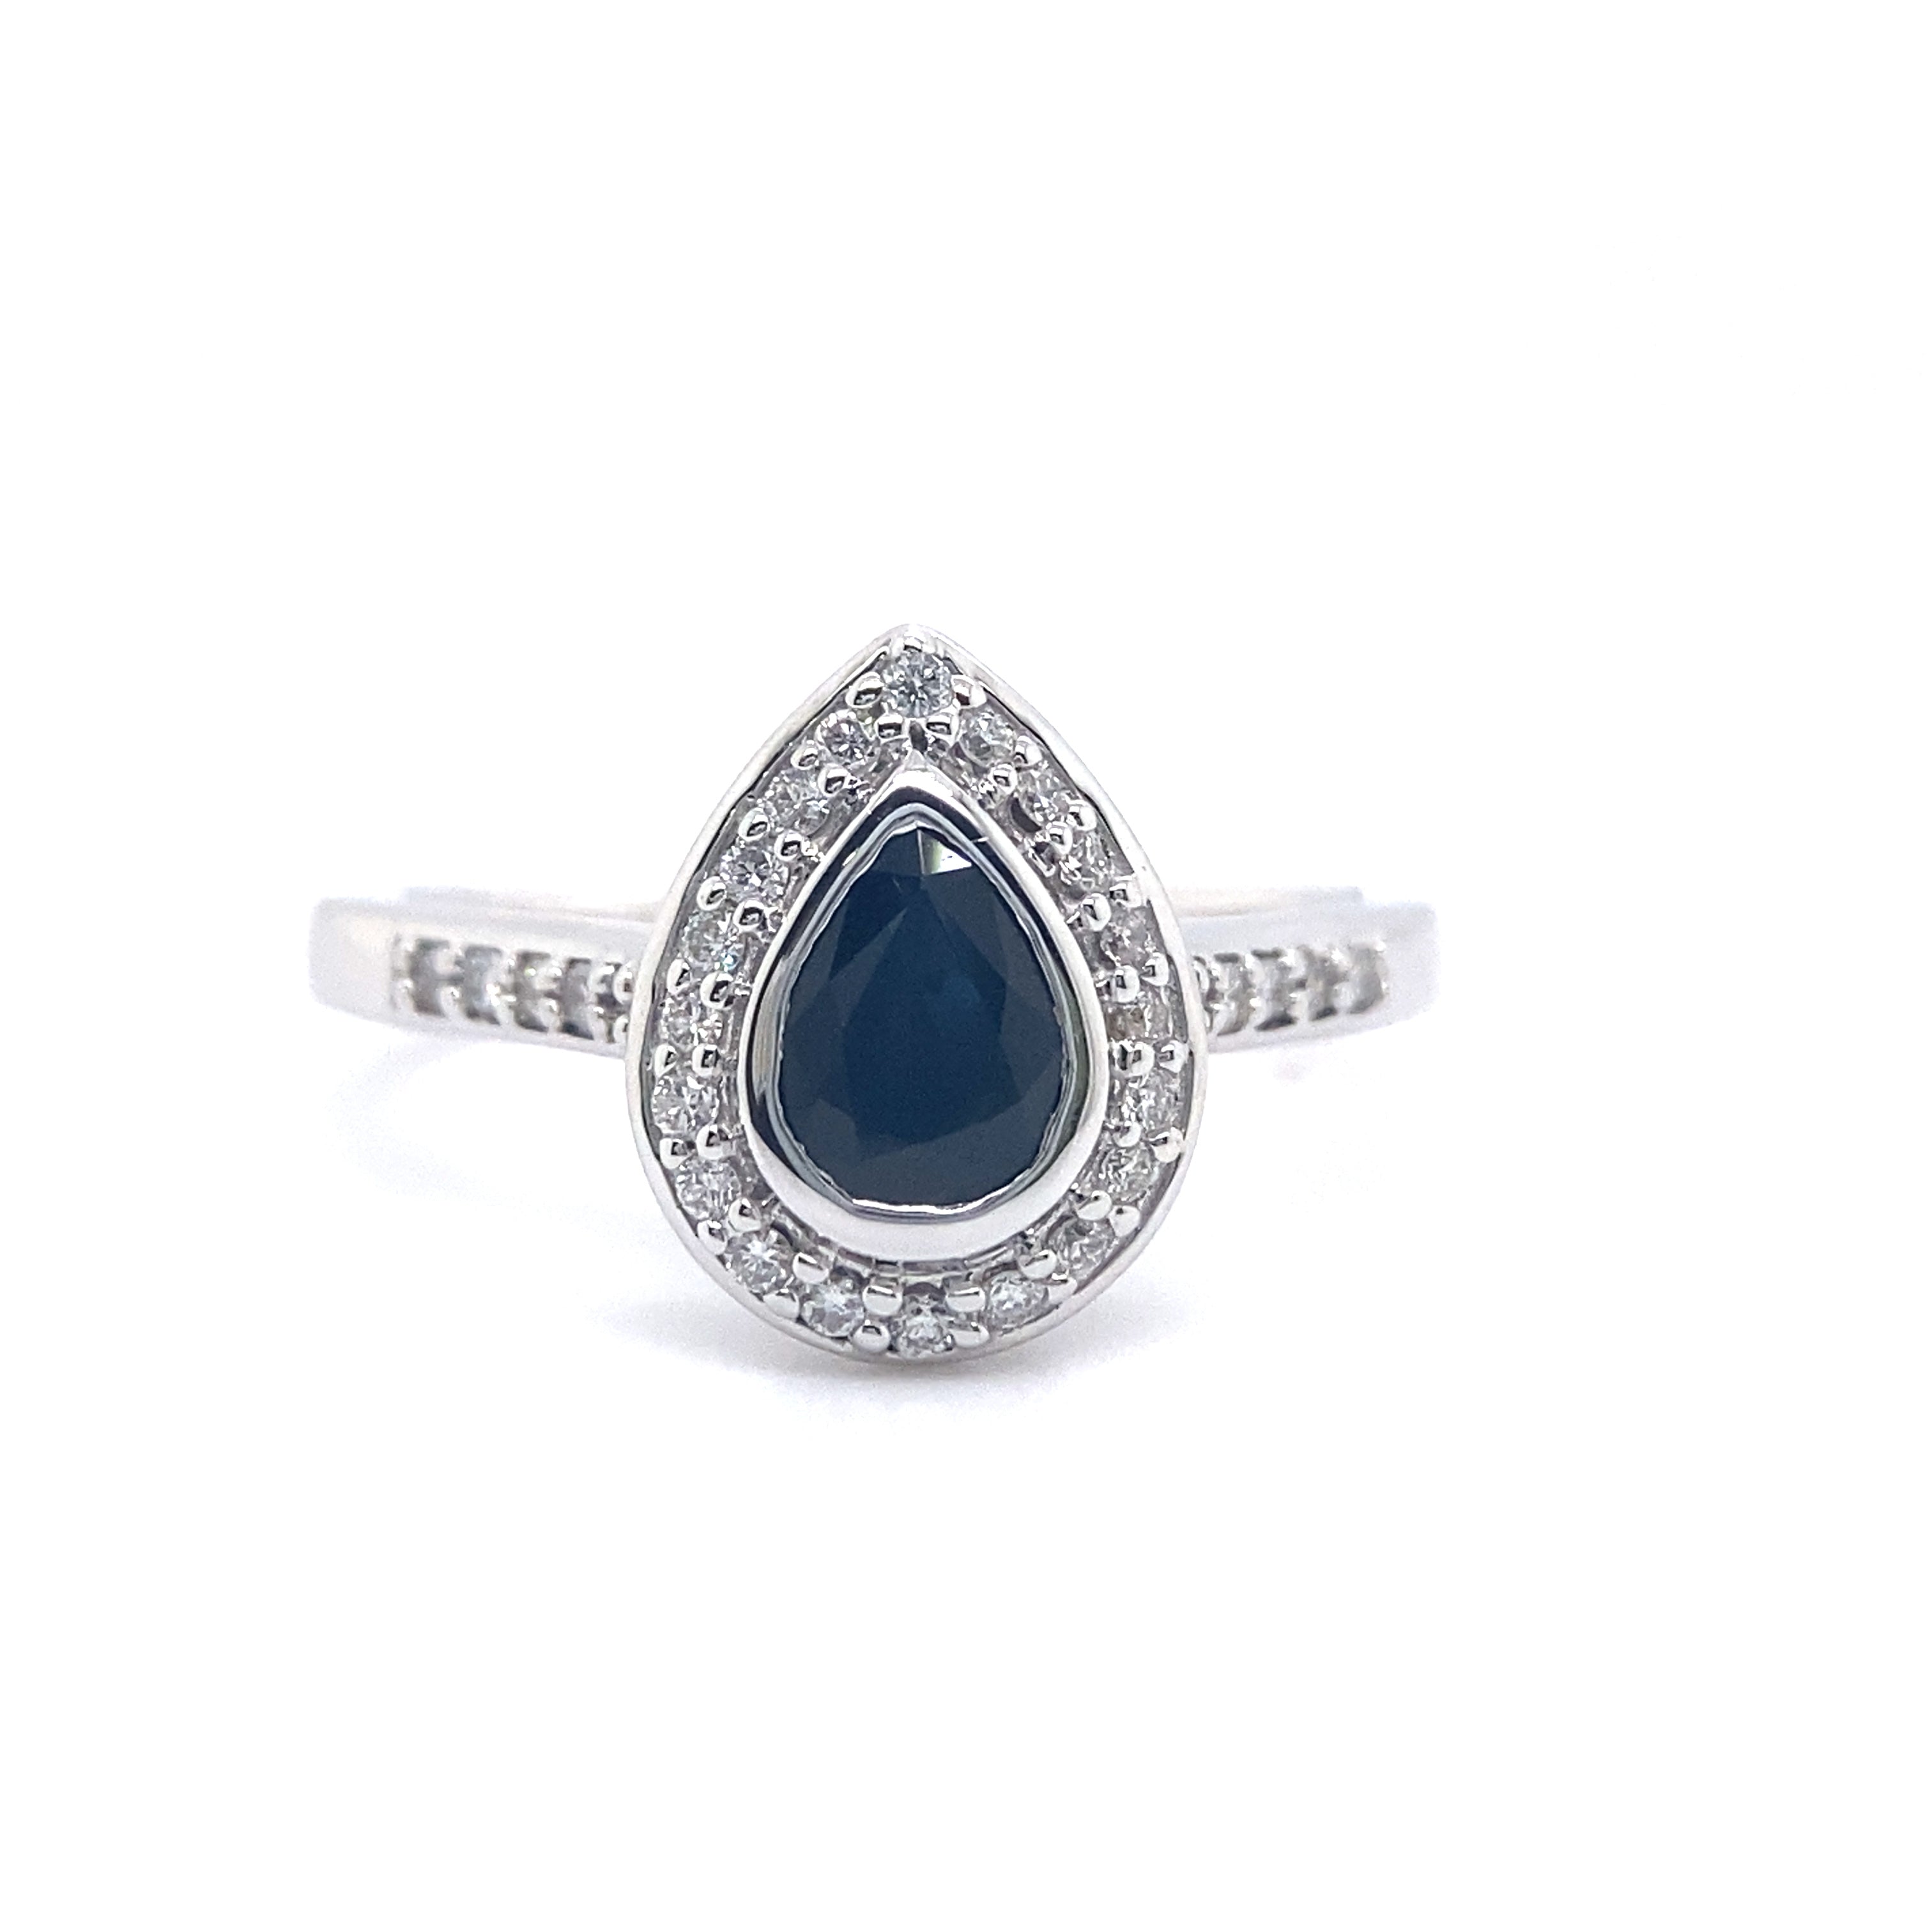 18ct white gold natural sapphire and diamond ring.